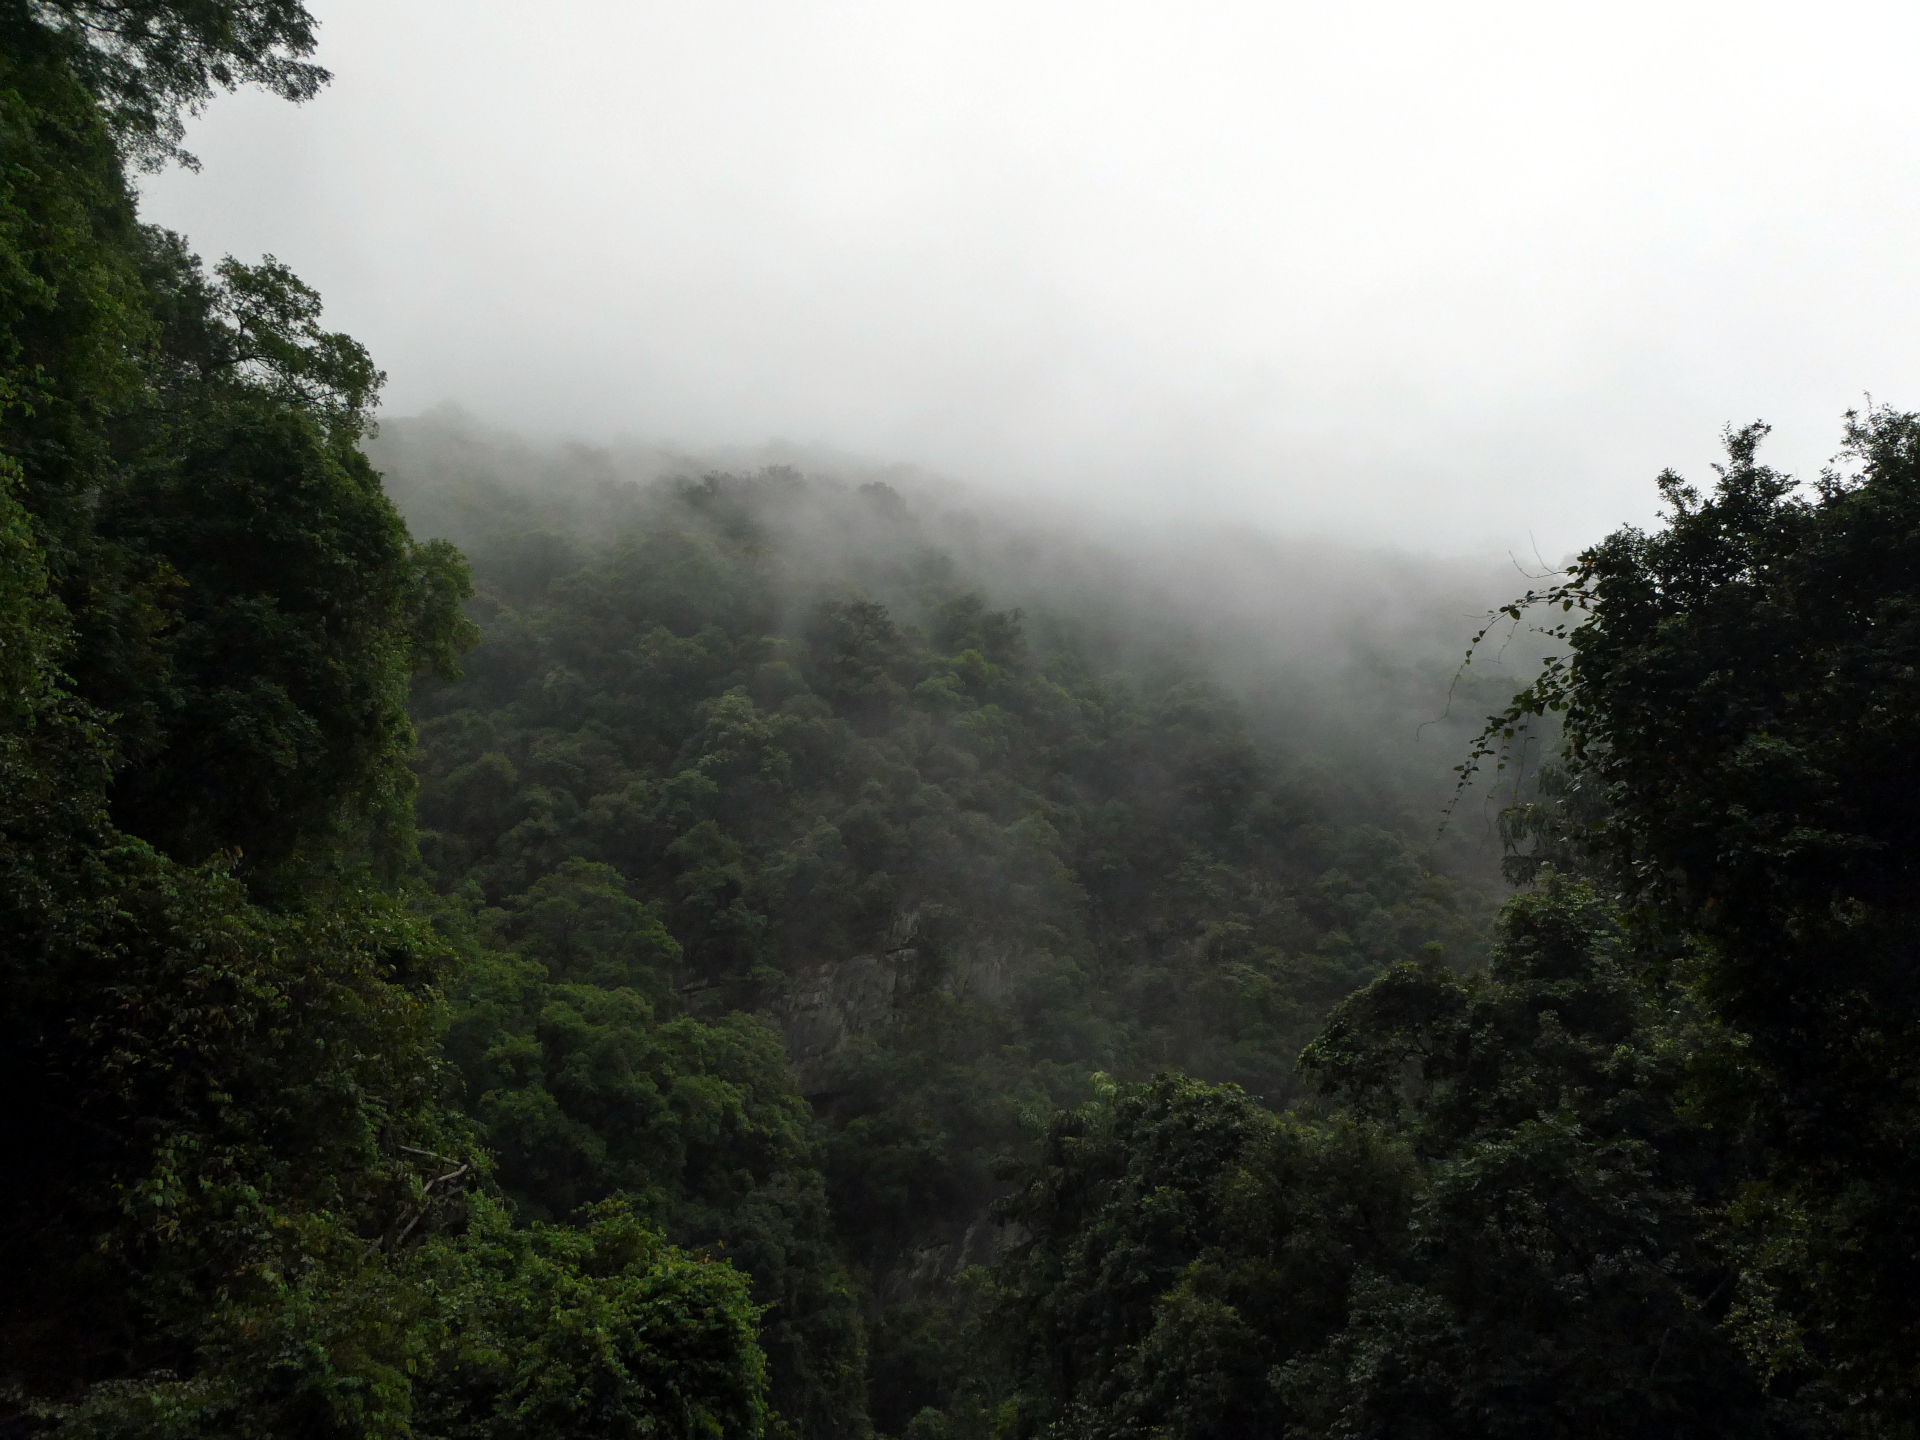 Mist covering the trees on Dinghu Shan